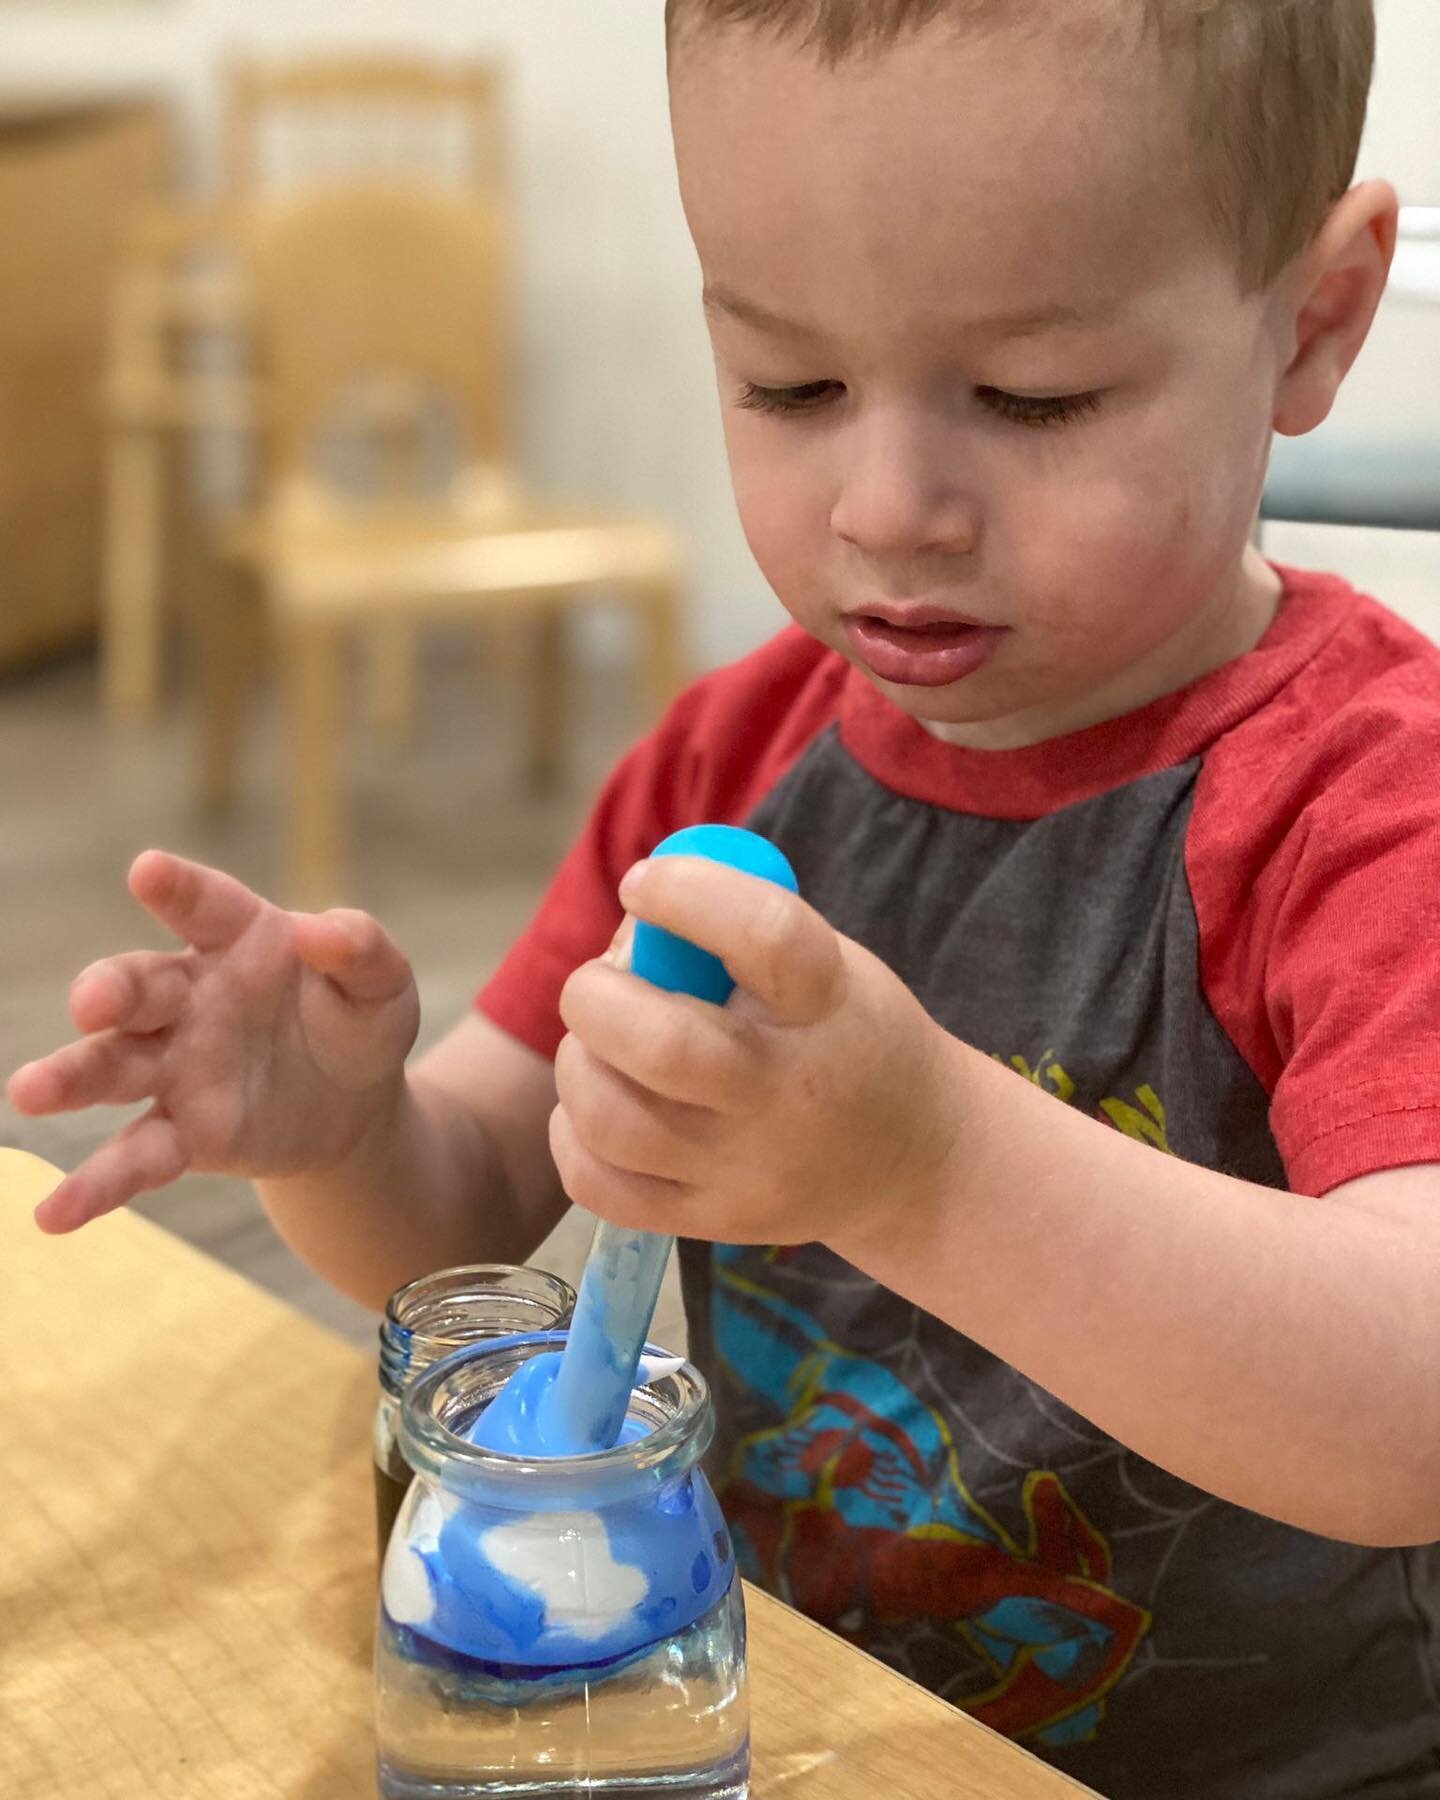 Making rain cloud jars for water week! 🌧 This engages both sensory and fine motor skills in a fun and unique way, and sparks curiosity in children.

For this activity you will need a mason jar filled 3/4 full of cold water, shaving cream to create c